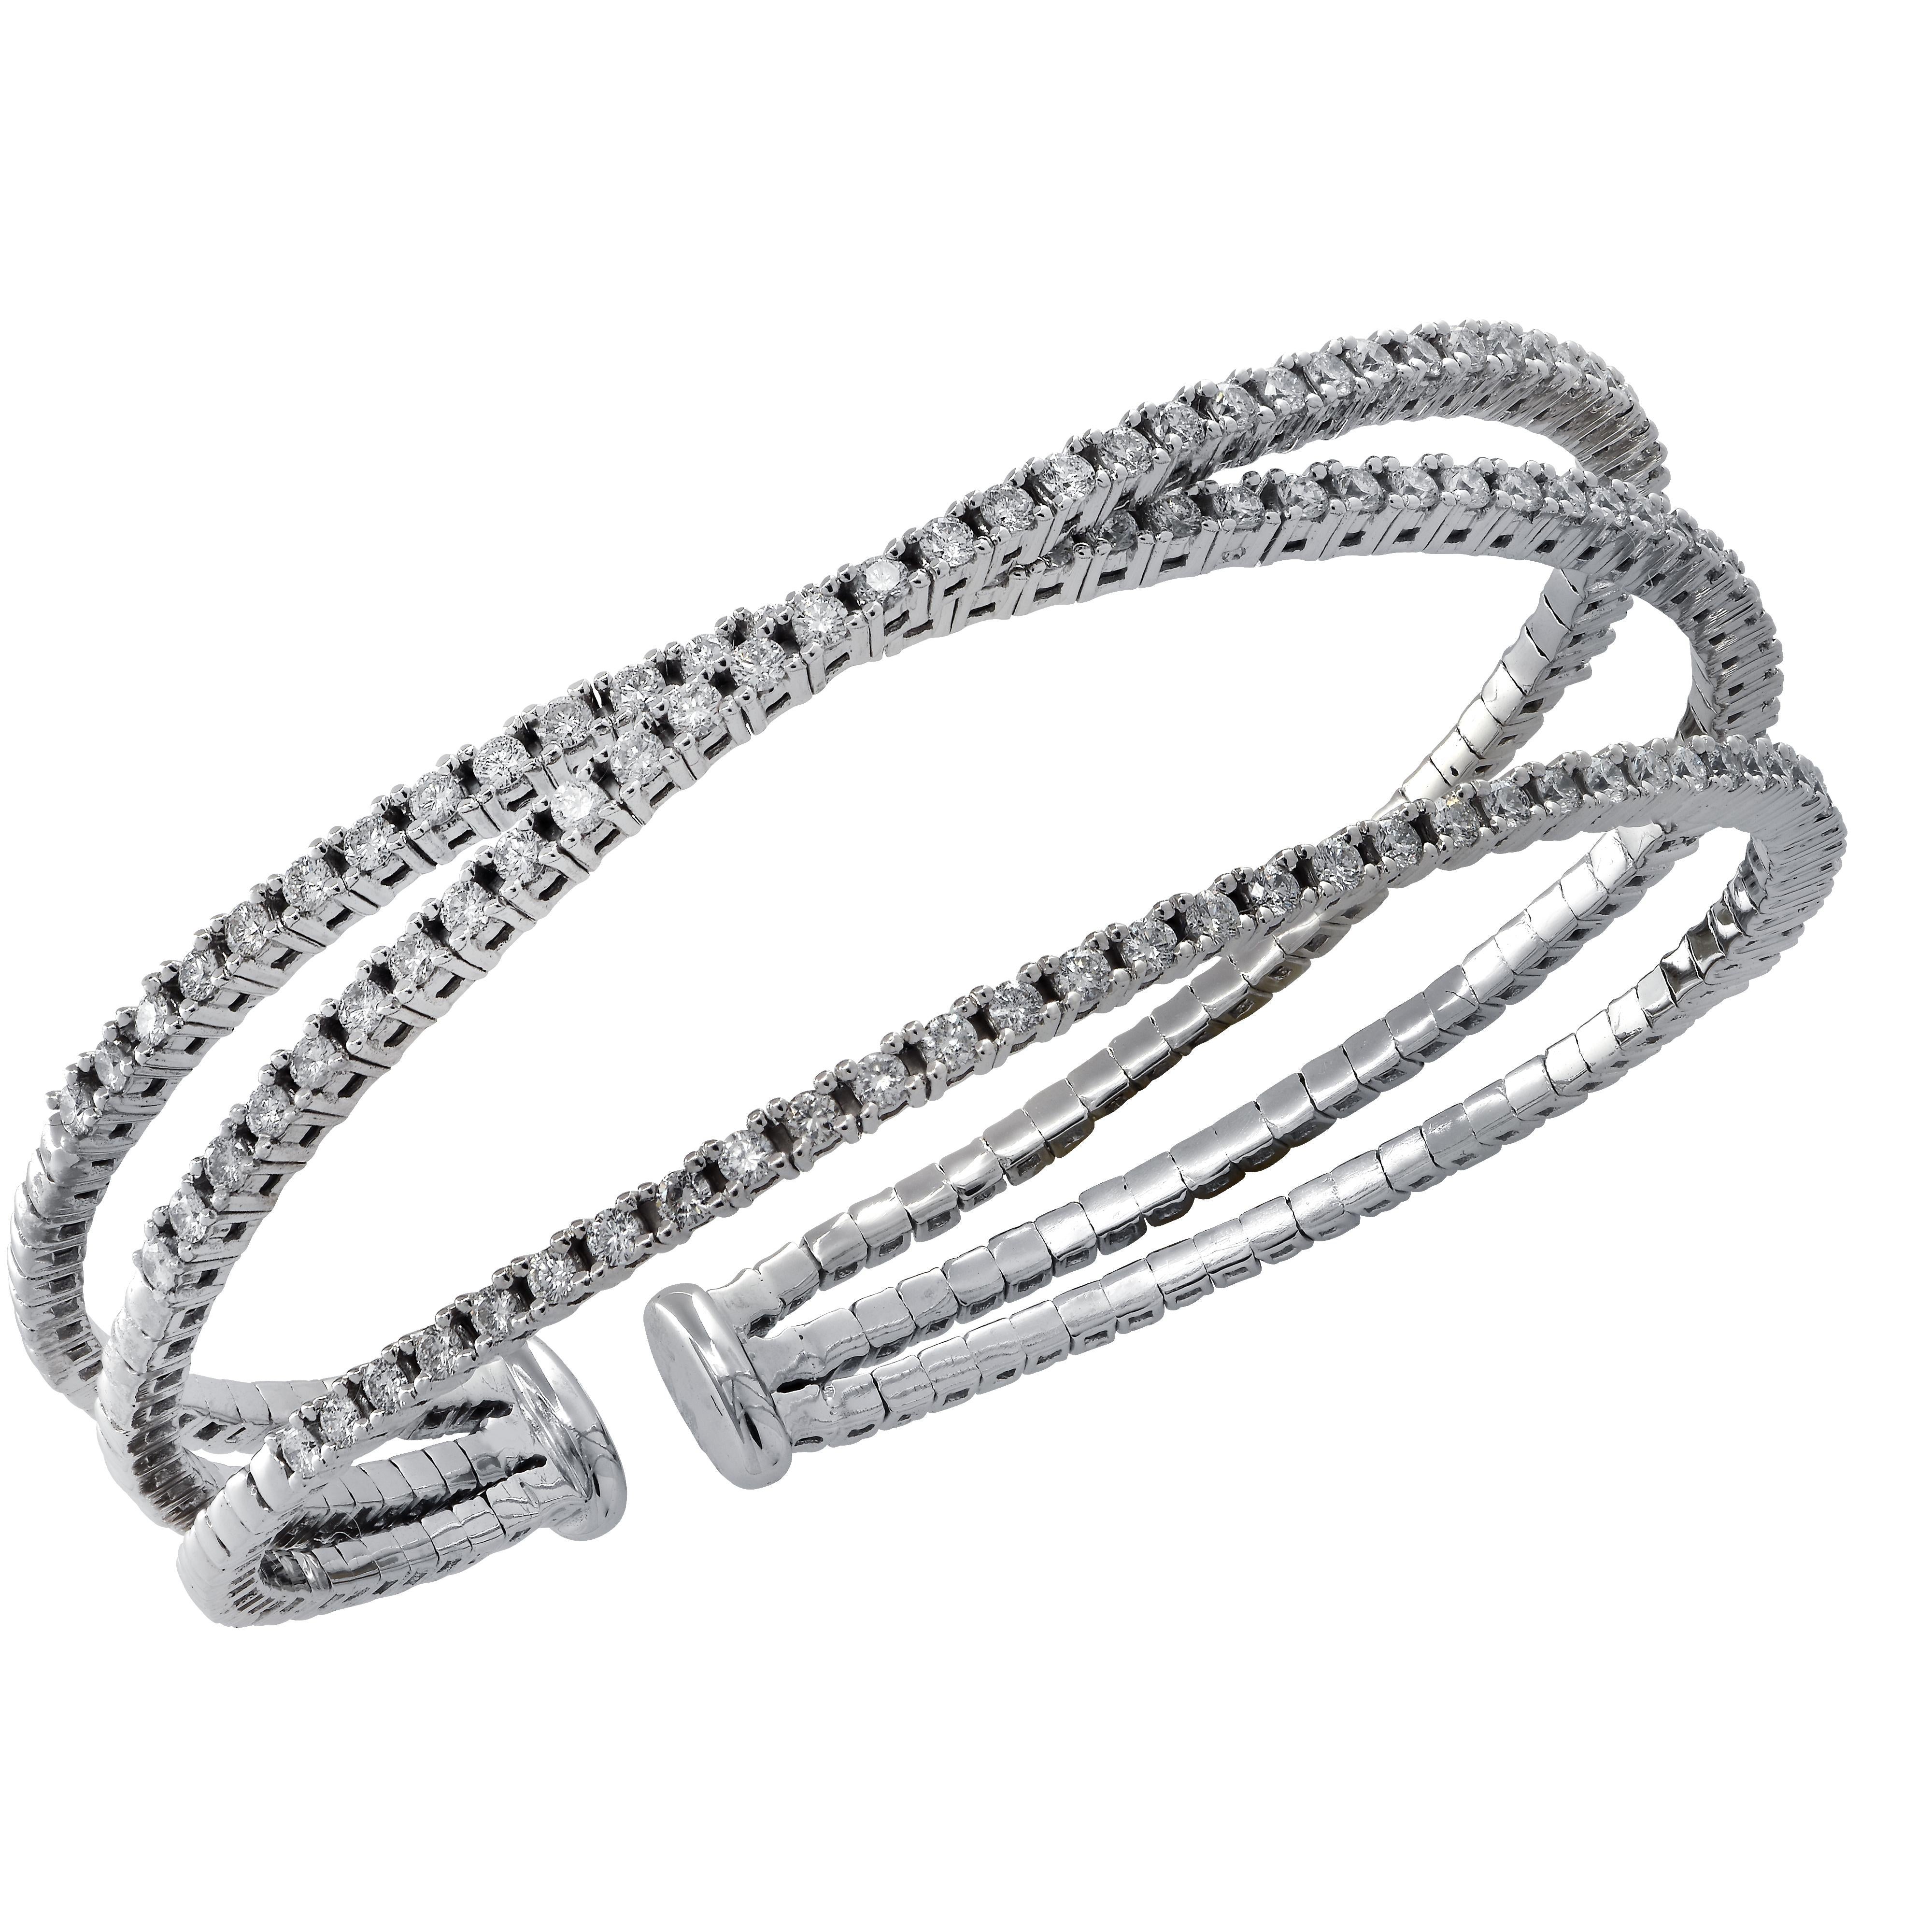 Stunning 3 row diamond cuff bangle bracelet crafted in White gold featuring 117 round brilliant cut diamonds weighing approximately 2.40 carats total, G color SI clarity. This bracelet has an inner circumference of 7.5 inches, and will fit wrist